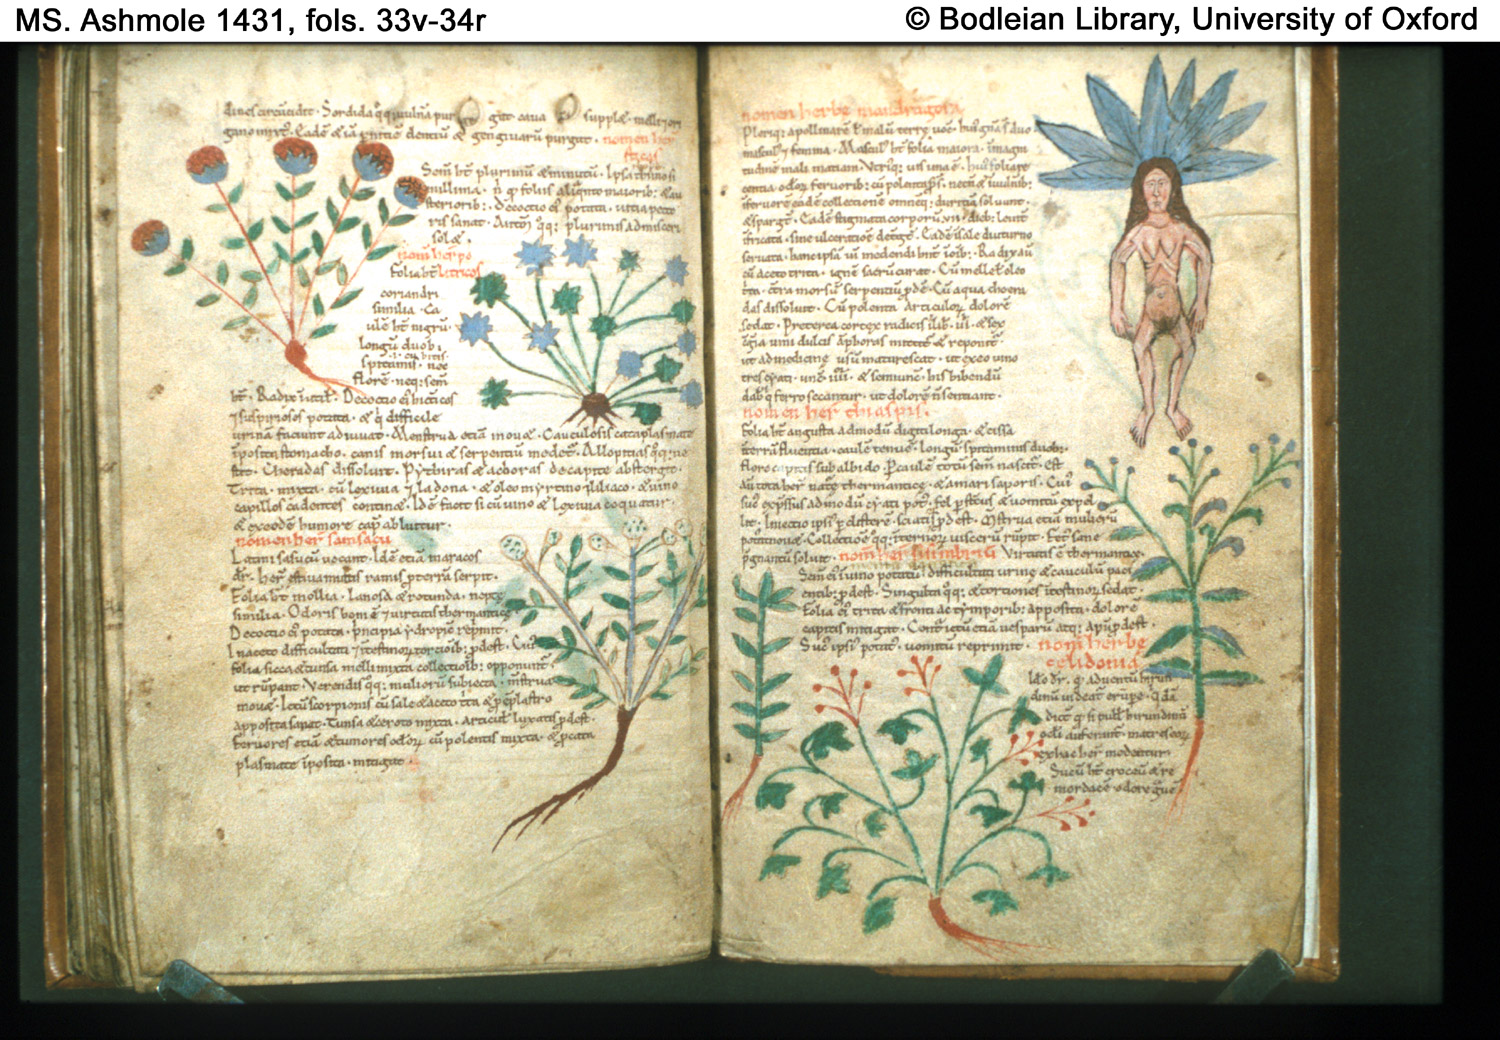 400 CE. The Anonymous Herbal Written by a Roman African and Copied by